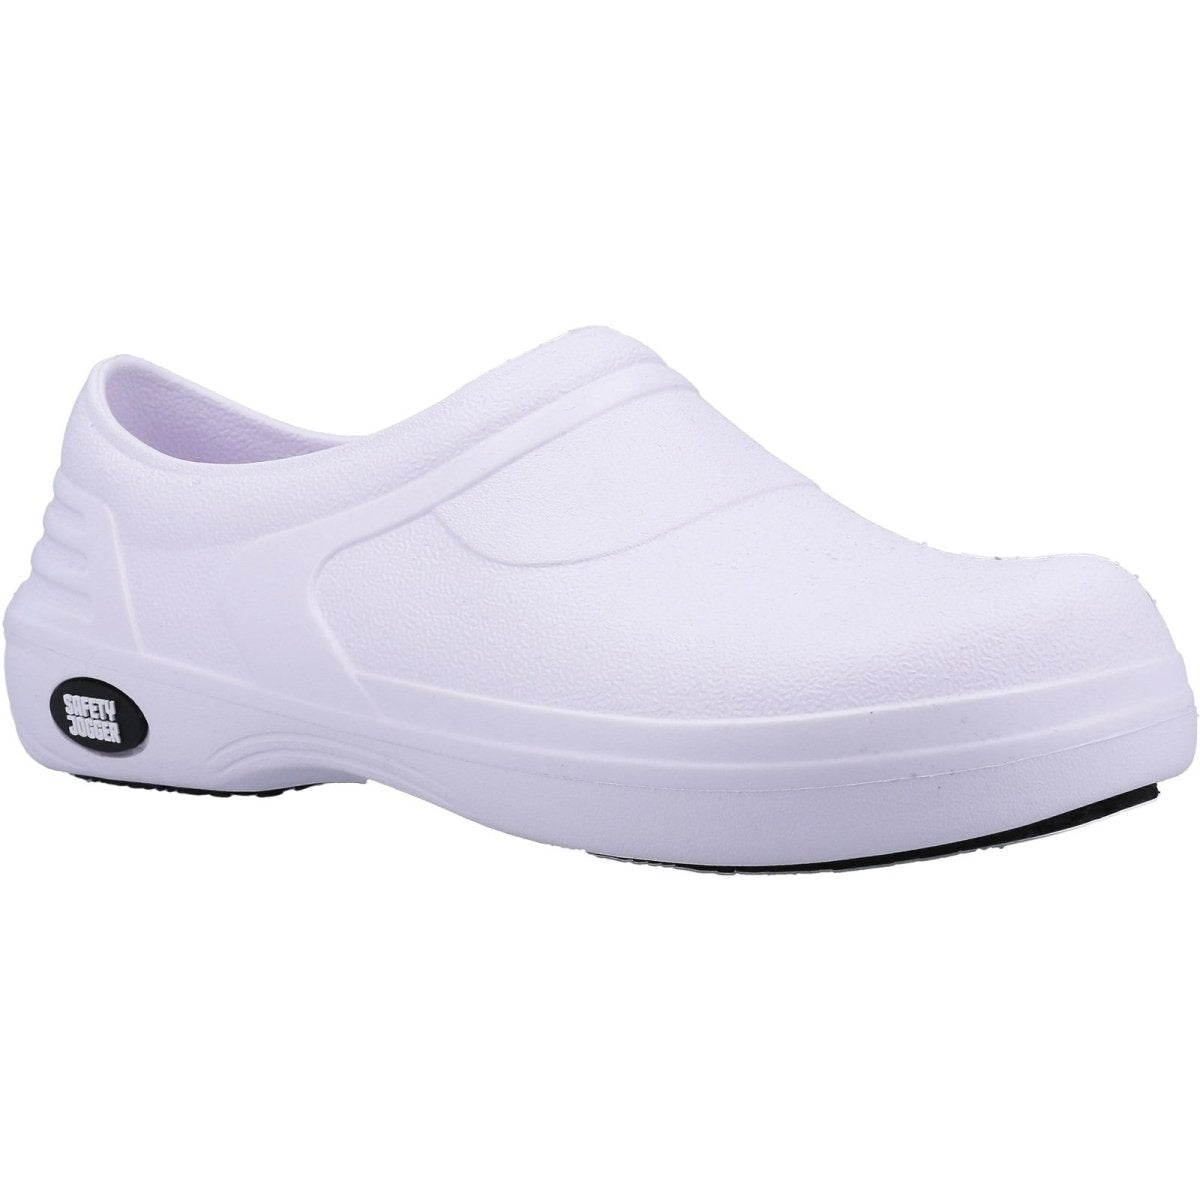 Safety Jogger BESTCLOG OB Occupational Footwear - Shoe Store Direct